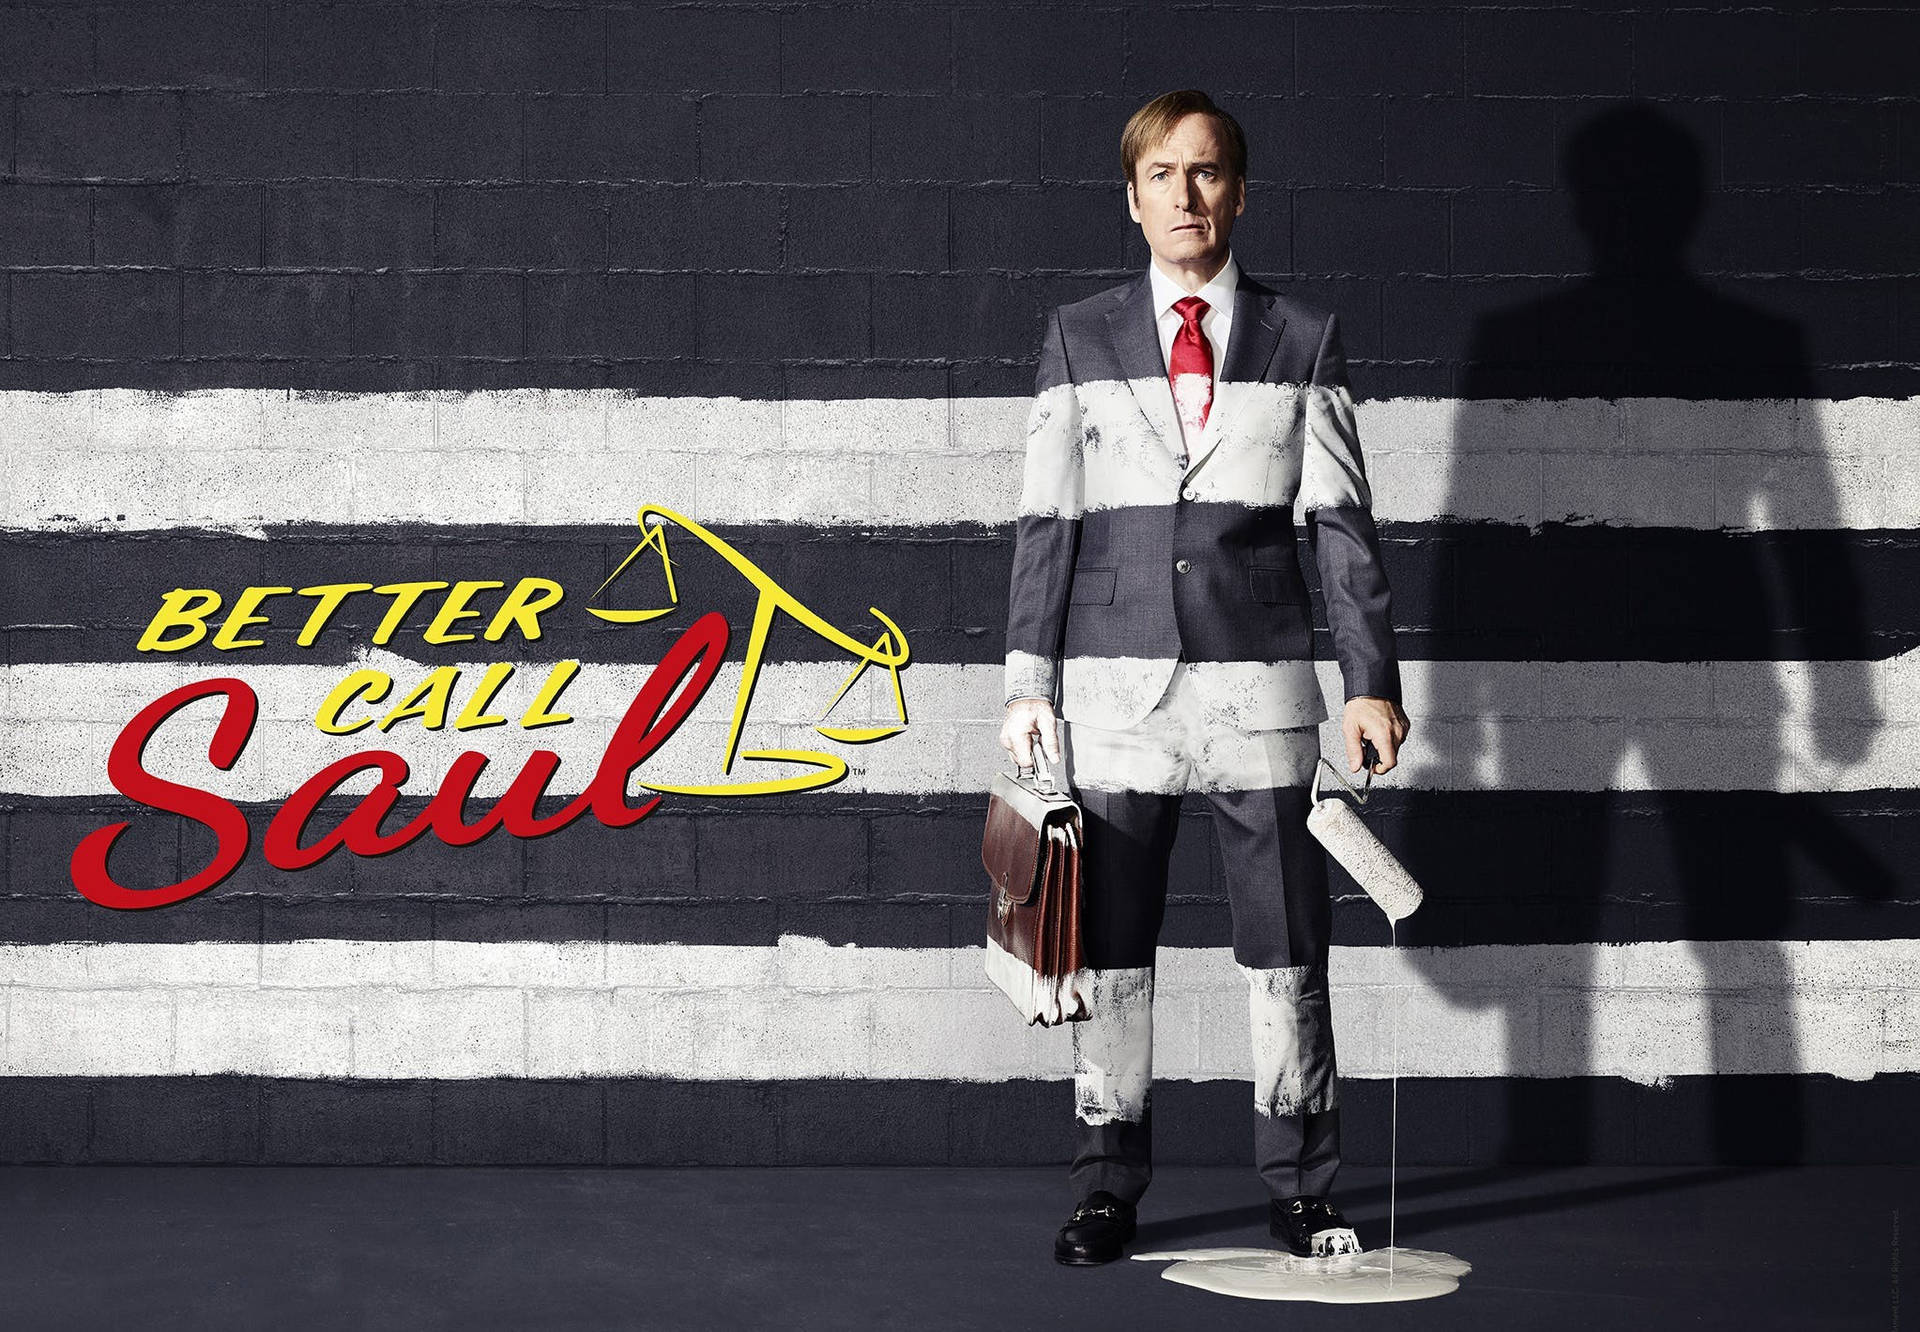 Better Call Saul Paint Stripes Background